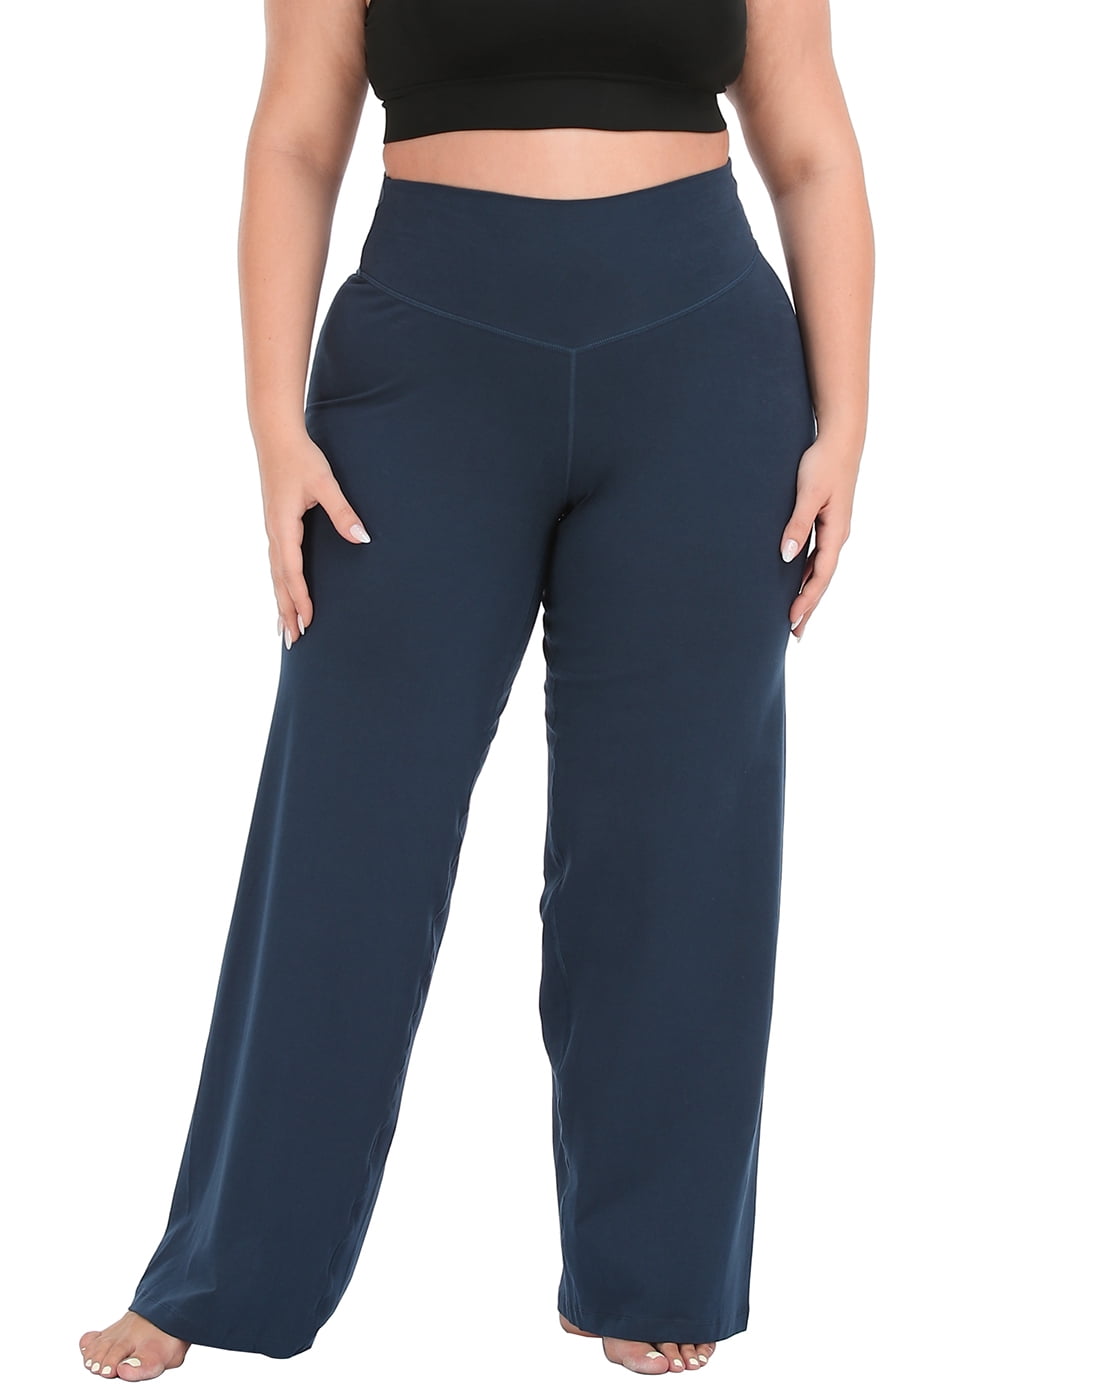 SEAOPEN Flare Leggings for Women Plus Size High Waisted Yoga Pants